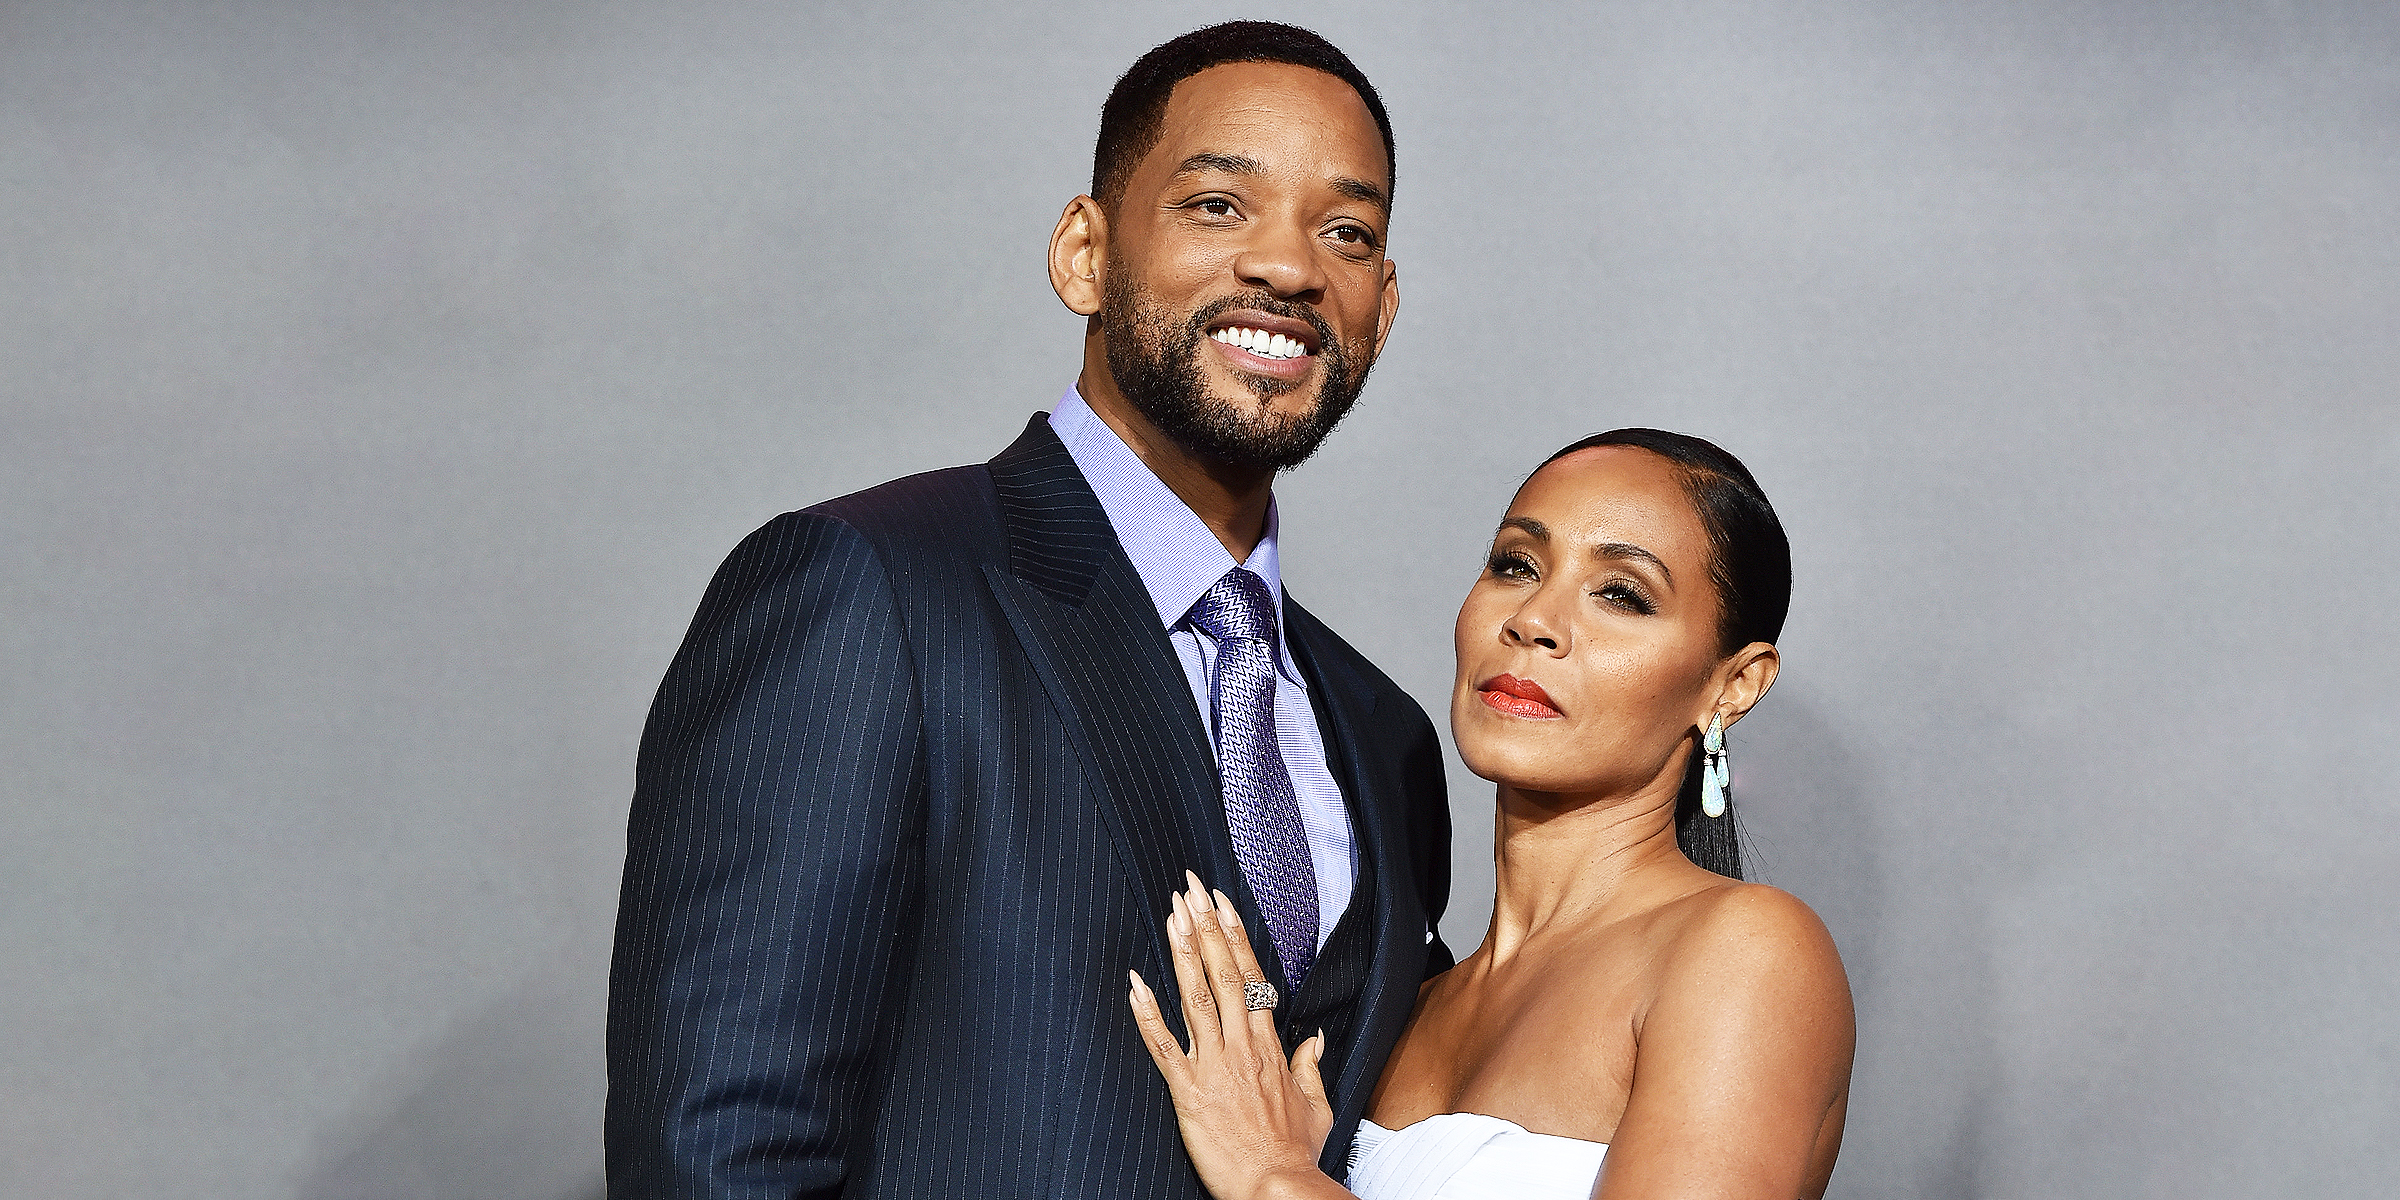 Will Smith and Jada Pinkett Smith. | Source: Getty Images